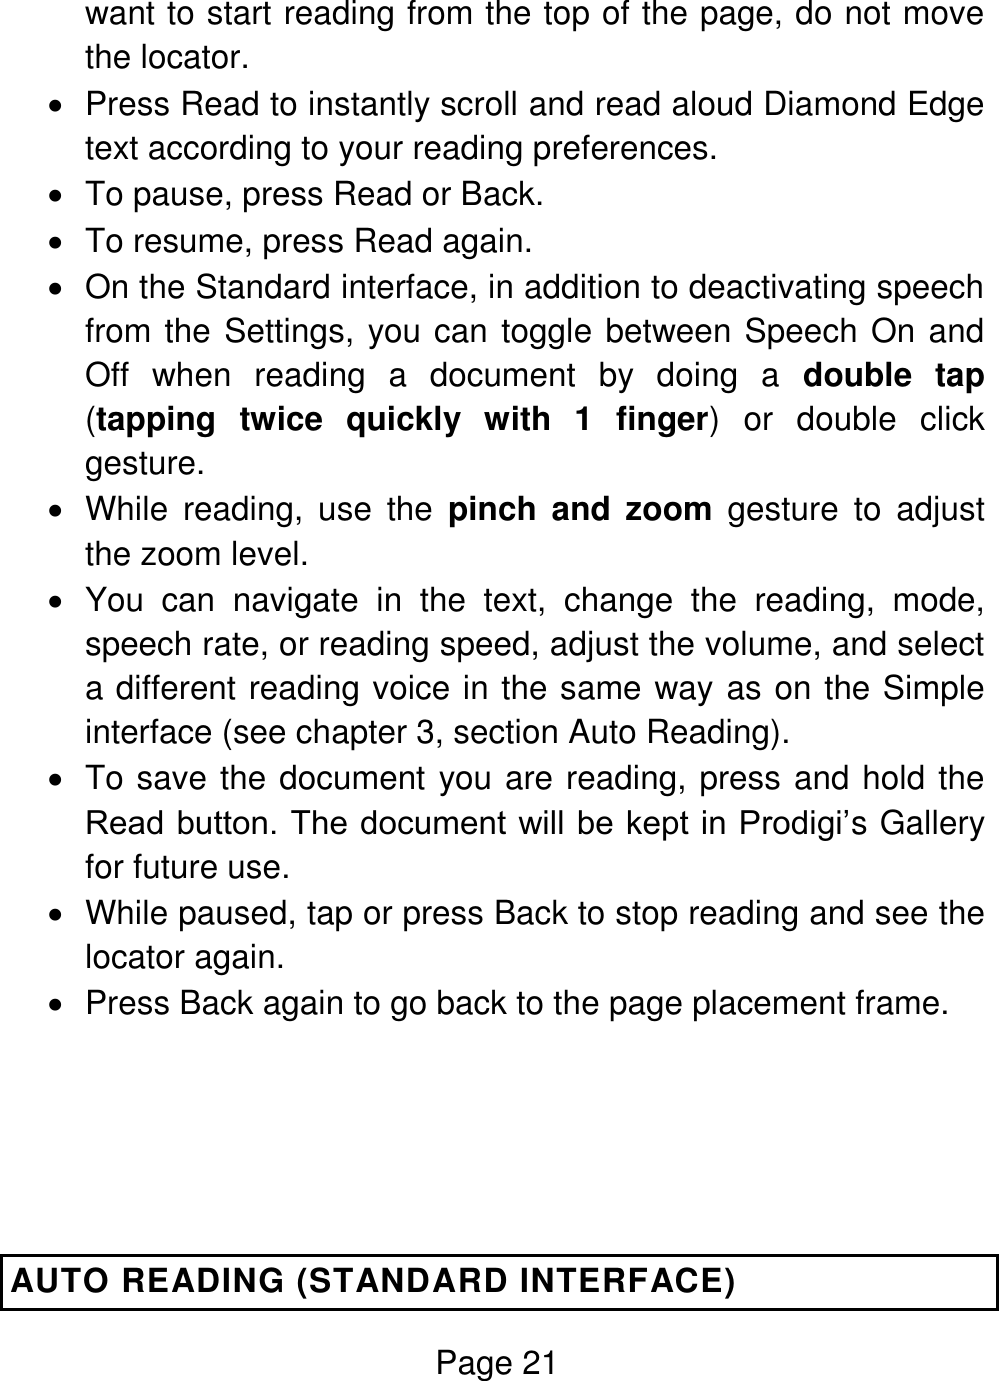 Page 21  want to start reading from the top of the page, do not move the locator.    Press Read to instantly scroll and read aloud Diamond Edge text according to your reading preferences.   To pause, press Read or Back.   To resume, press Read again.   On the Standard interface, in addition to deactivating speech from the Settings, you can toggle between Speech On and Off  when  reading  a  document  by  doing  a  double  tap (tapping  twice  quickly  with  1  finger)  or  double  click gesture.   While  reading,  use  the  pinch and  zoom  gesture  to  adjust the zoom level.   You  can  navigate  in  the  text,  change  the  reading,  mode, speech rate, or reading speed, adjust the volume, and select a different reading voice in the same way as on the Simple interface (see chapter 3, section Auto Reading).   To save the document you are reading, press and hold the Read button. The document will be kept in Prodigi’s Gallery for future use.   While paused, tap or press Back to stop reading and see the locator again.   Press Back again to go back to the page placement frame.    AUTO READING (STANDARD INTERFACE) 